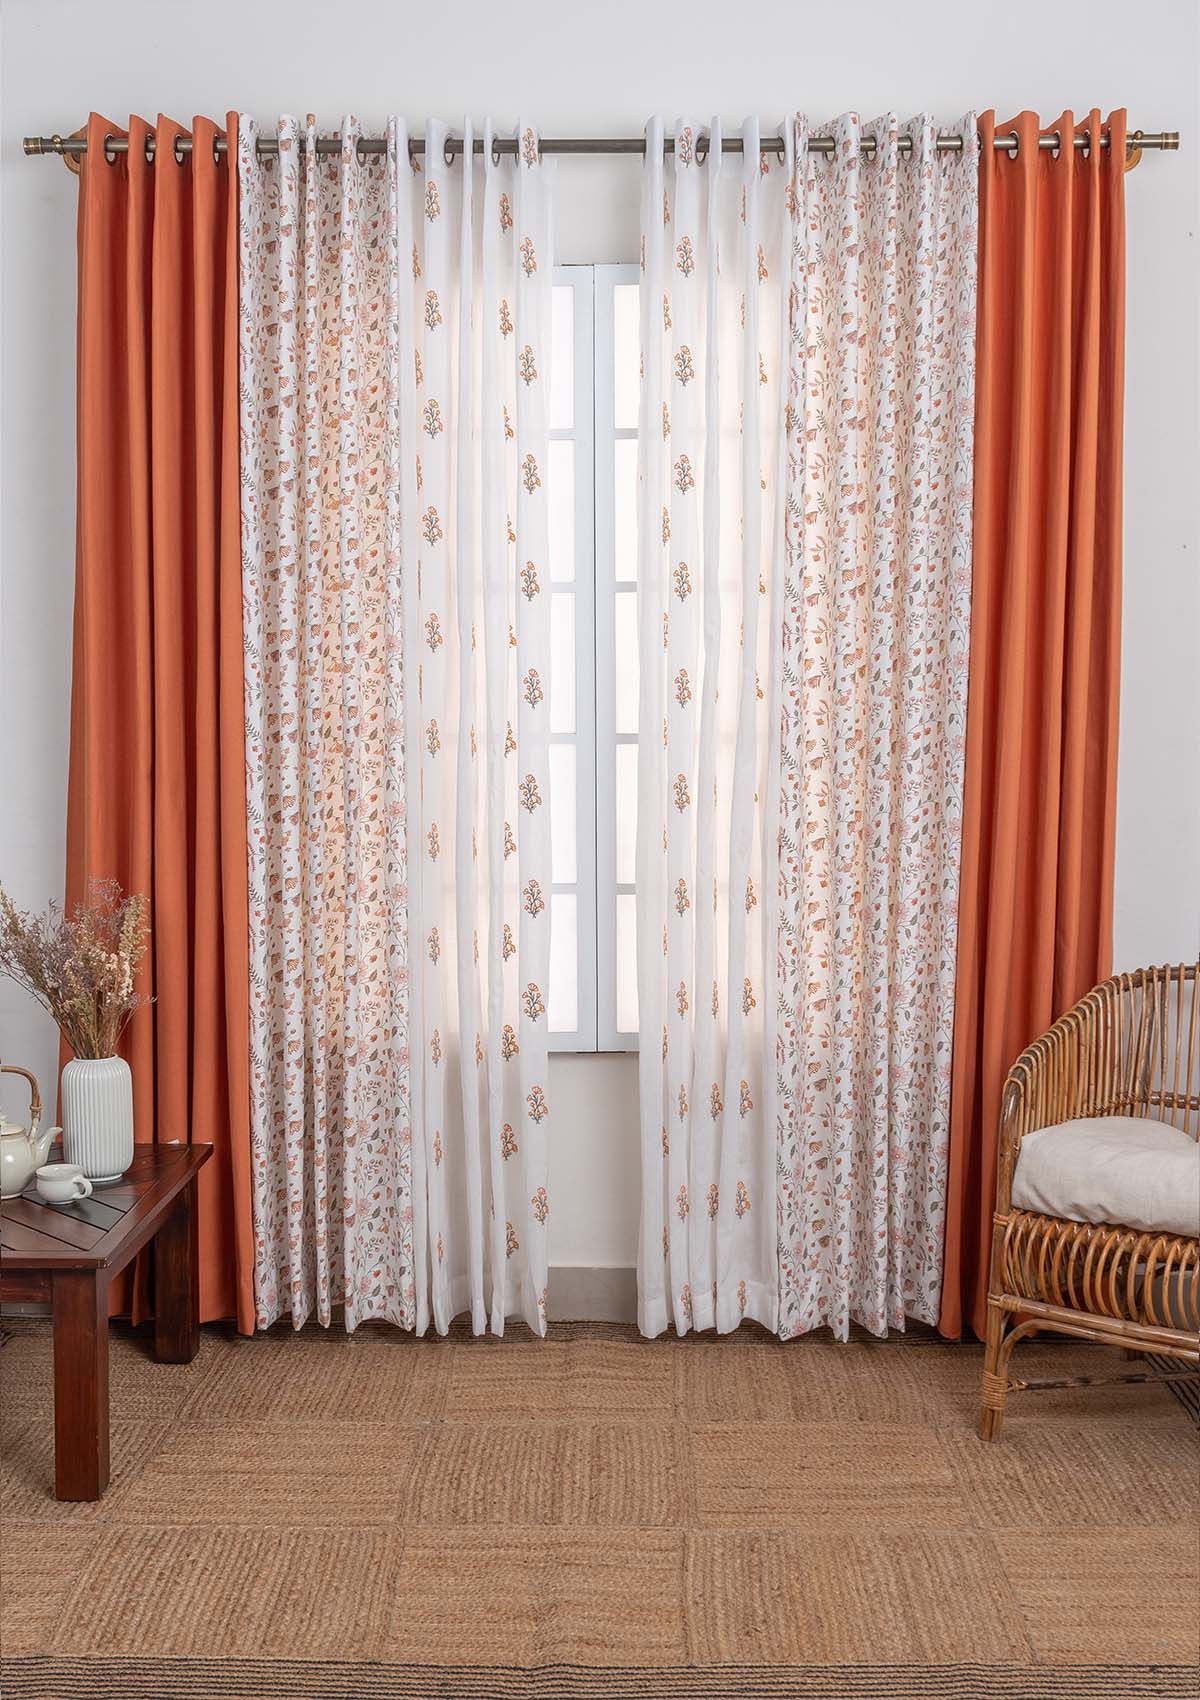 Solid Orange, forest bloom floral cotton curtain with Spring floral sheer 100% cotton curtains for living room - Set of 6